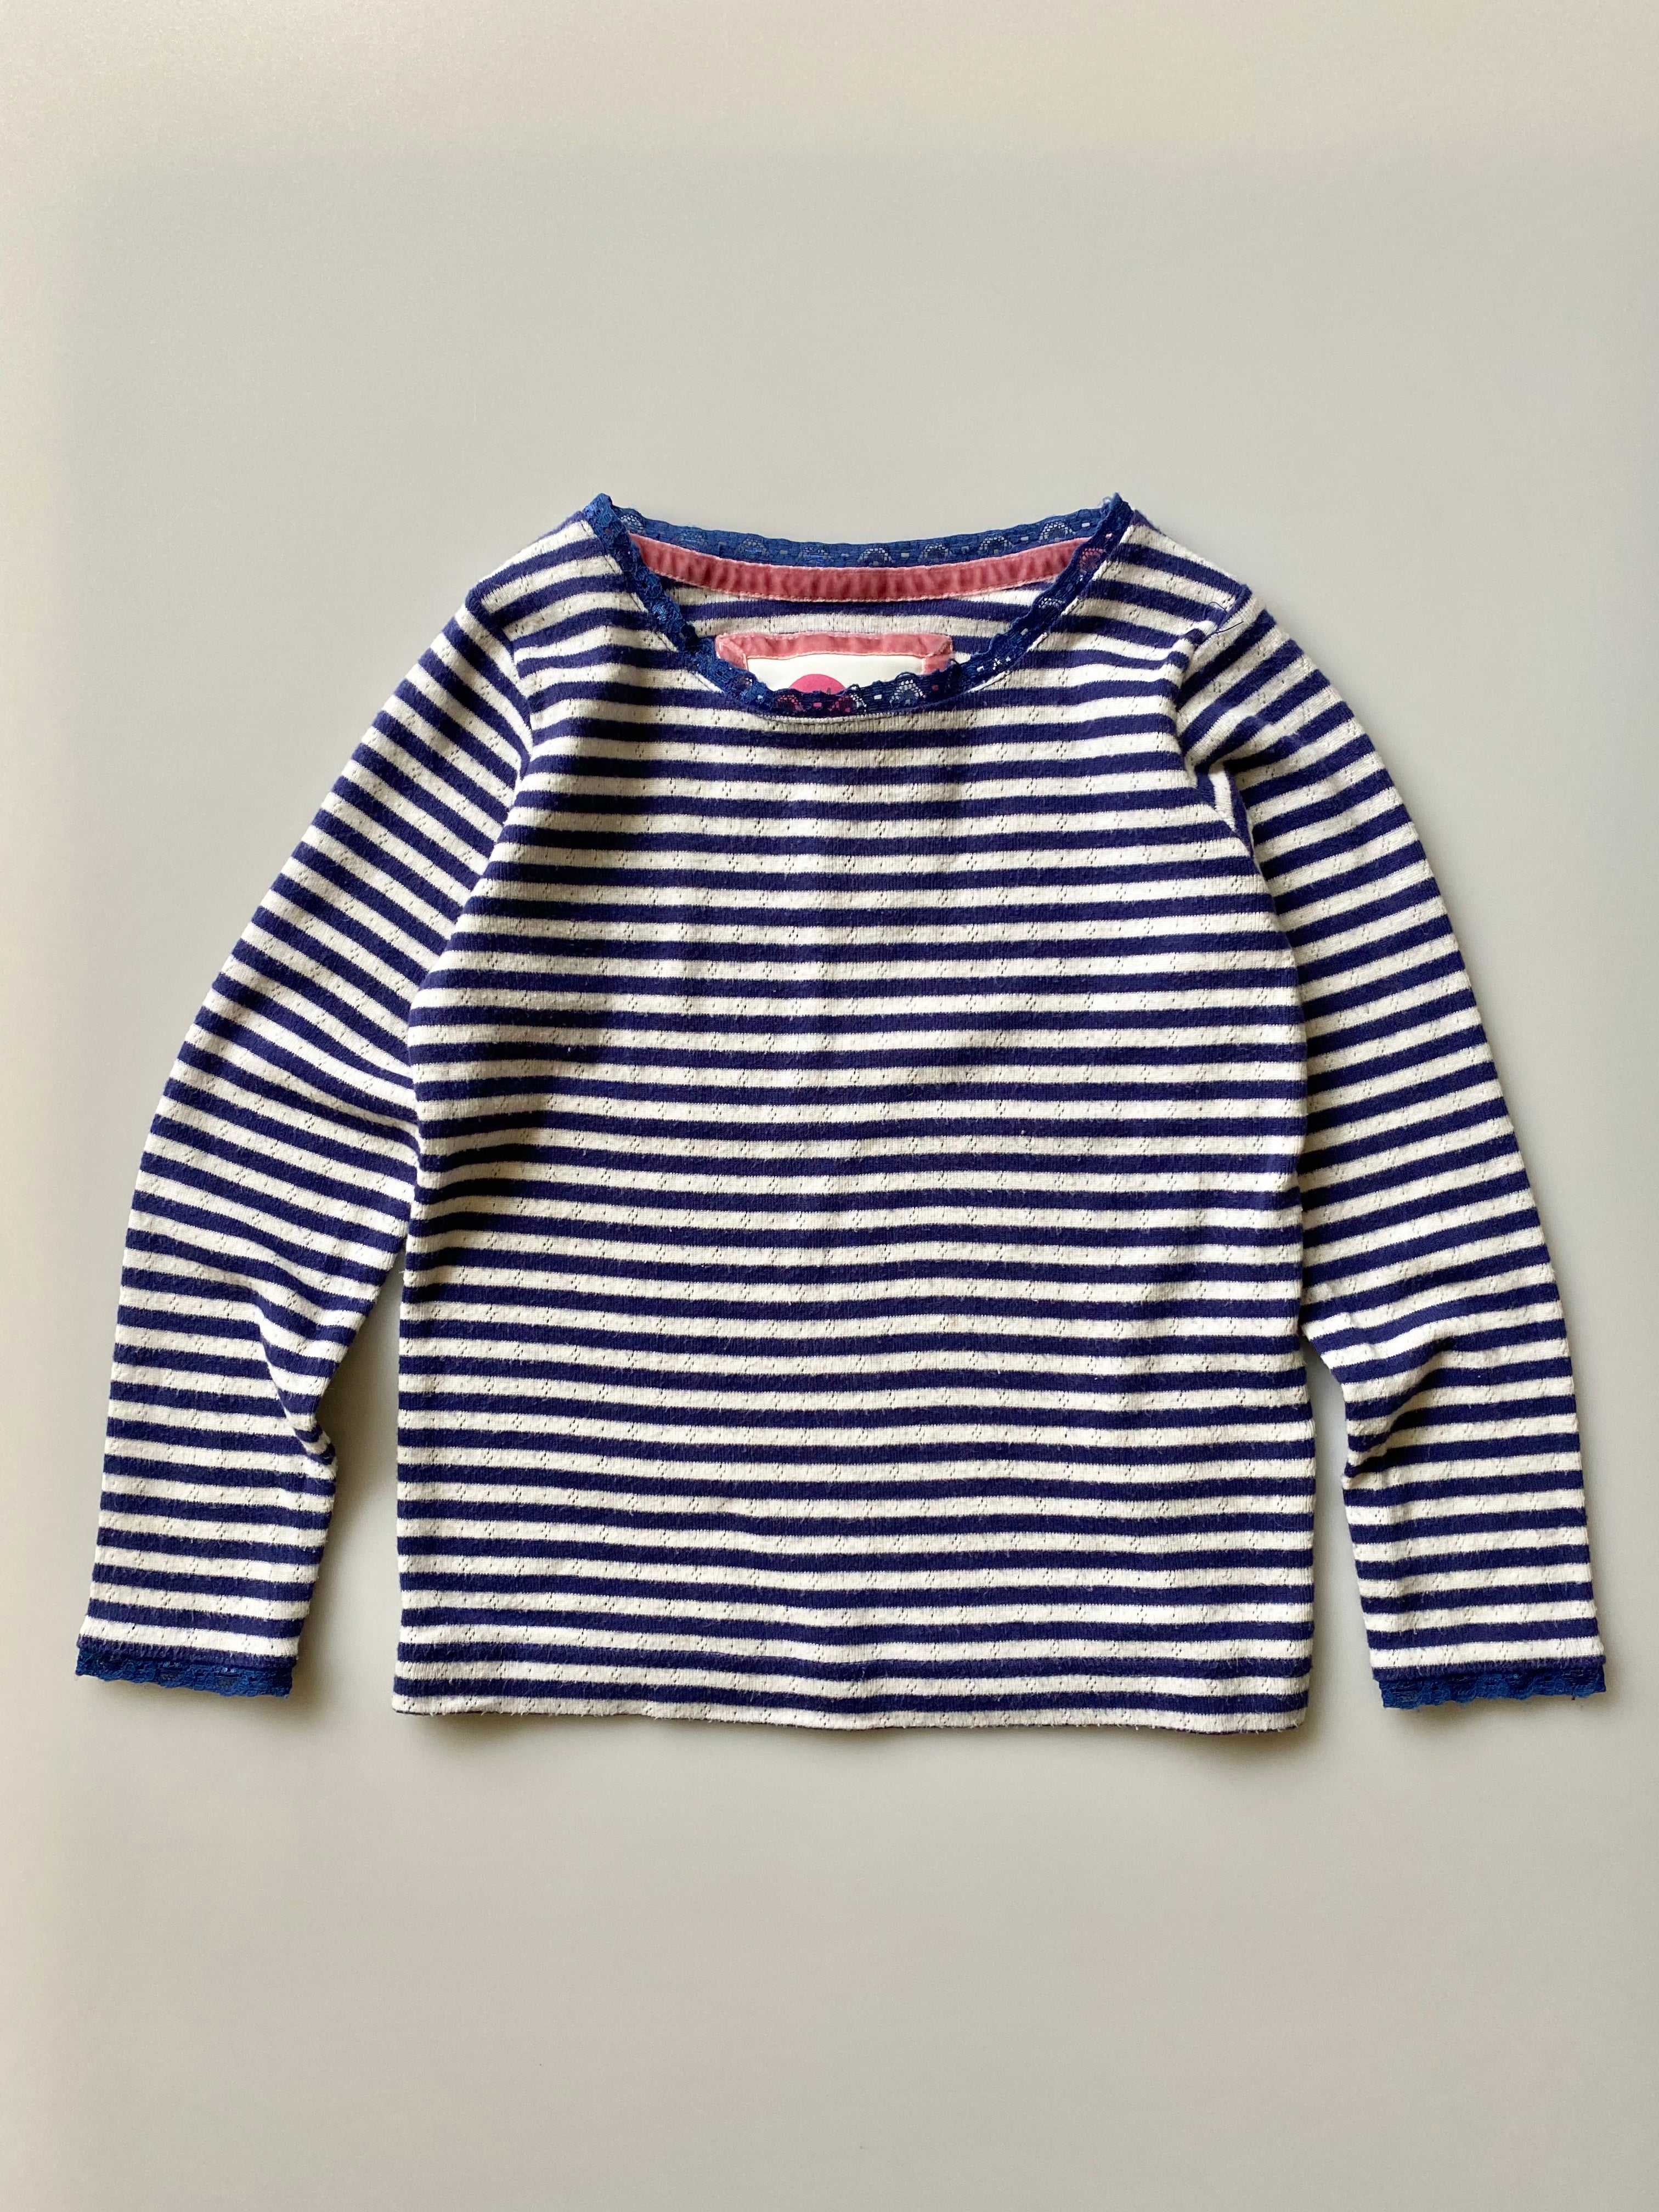 Boden Super Soft Pointelle Thermal Top Age 6-7